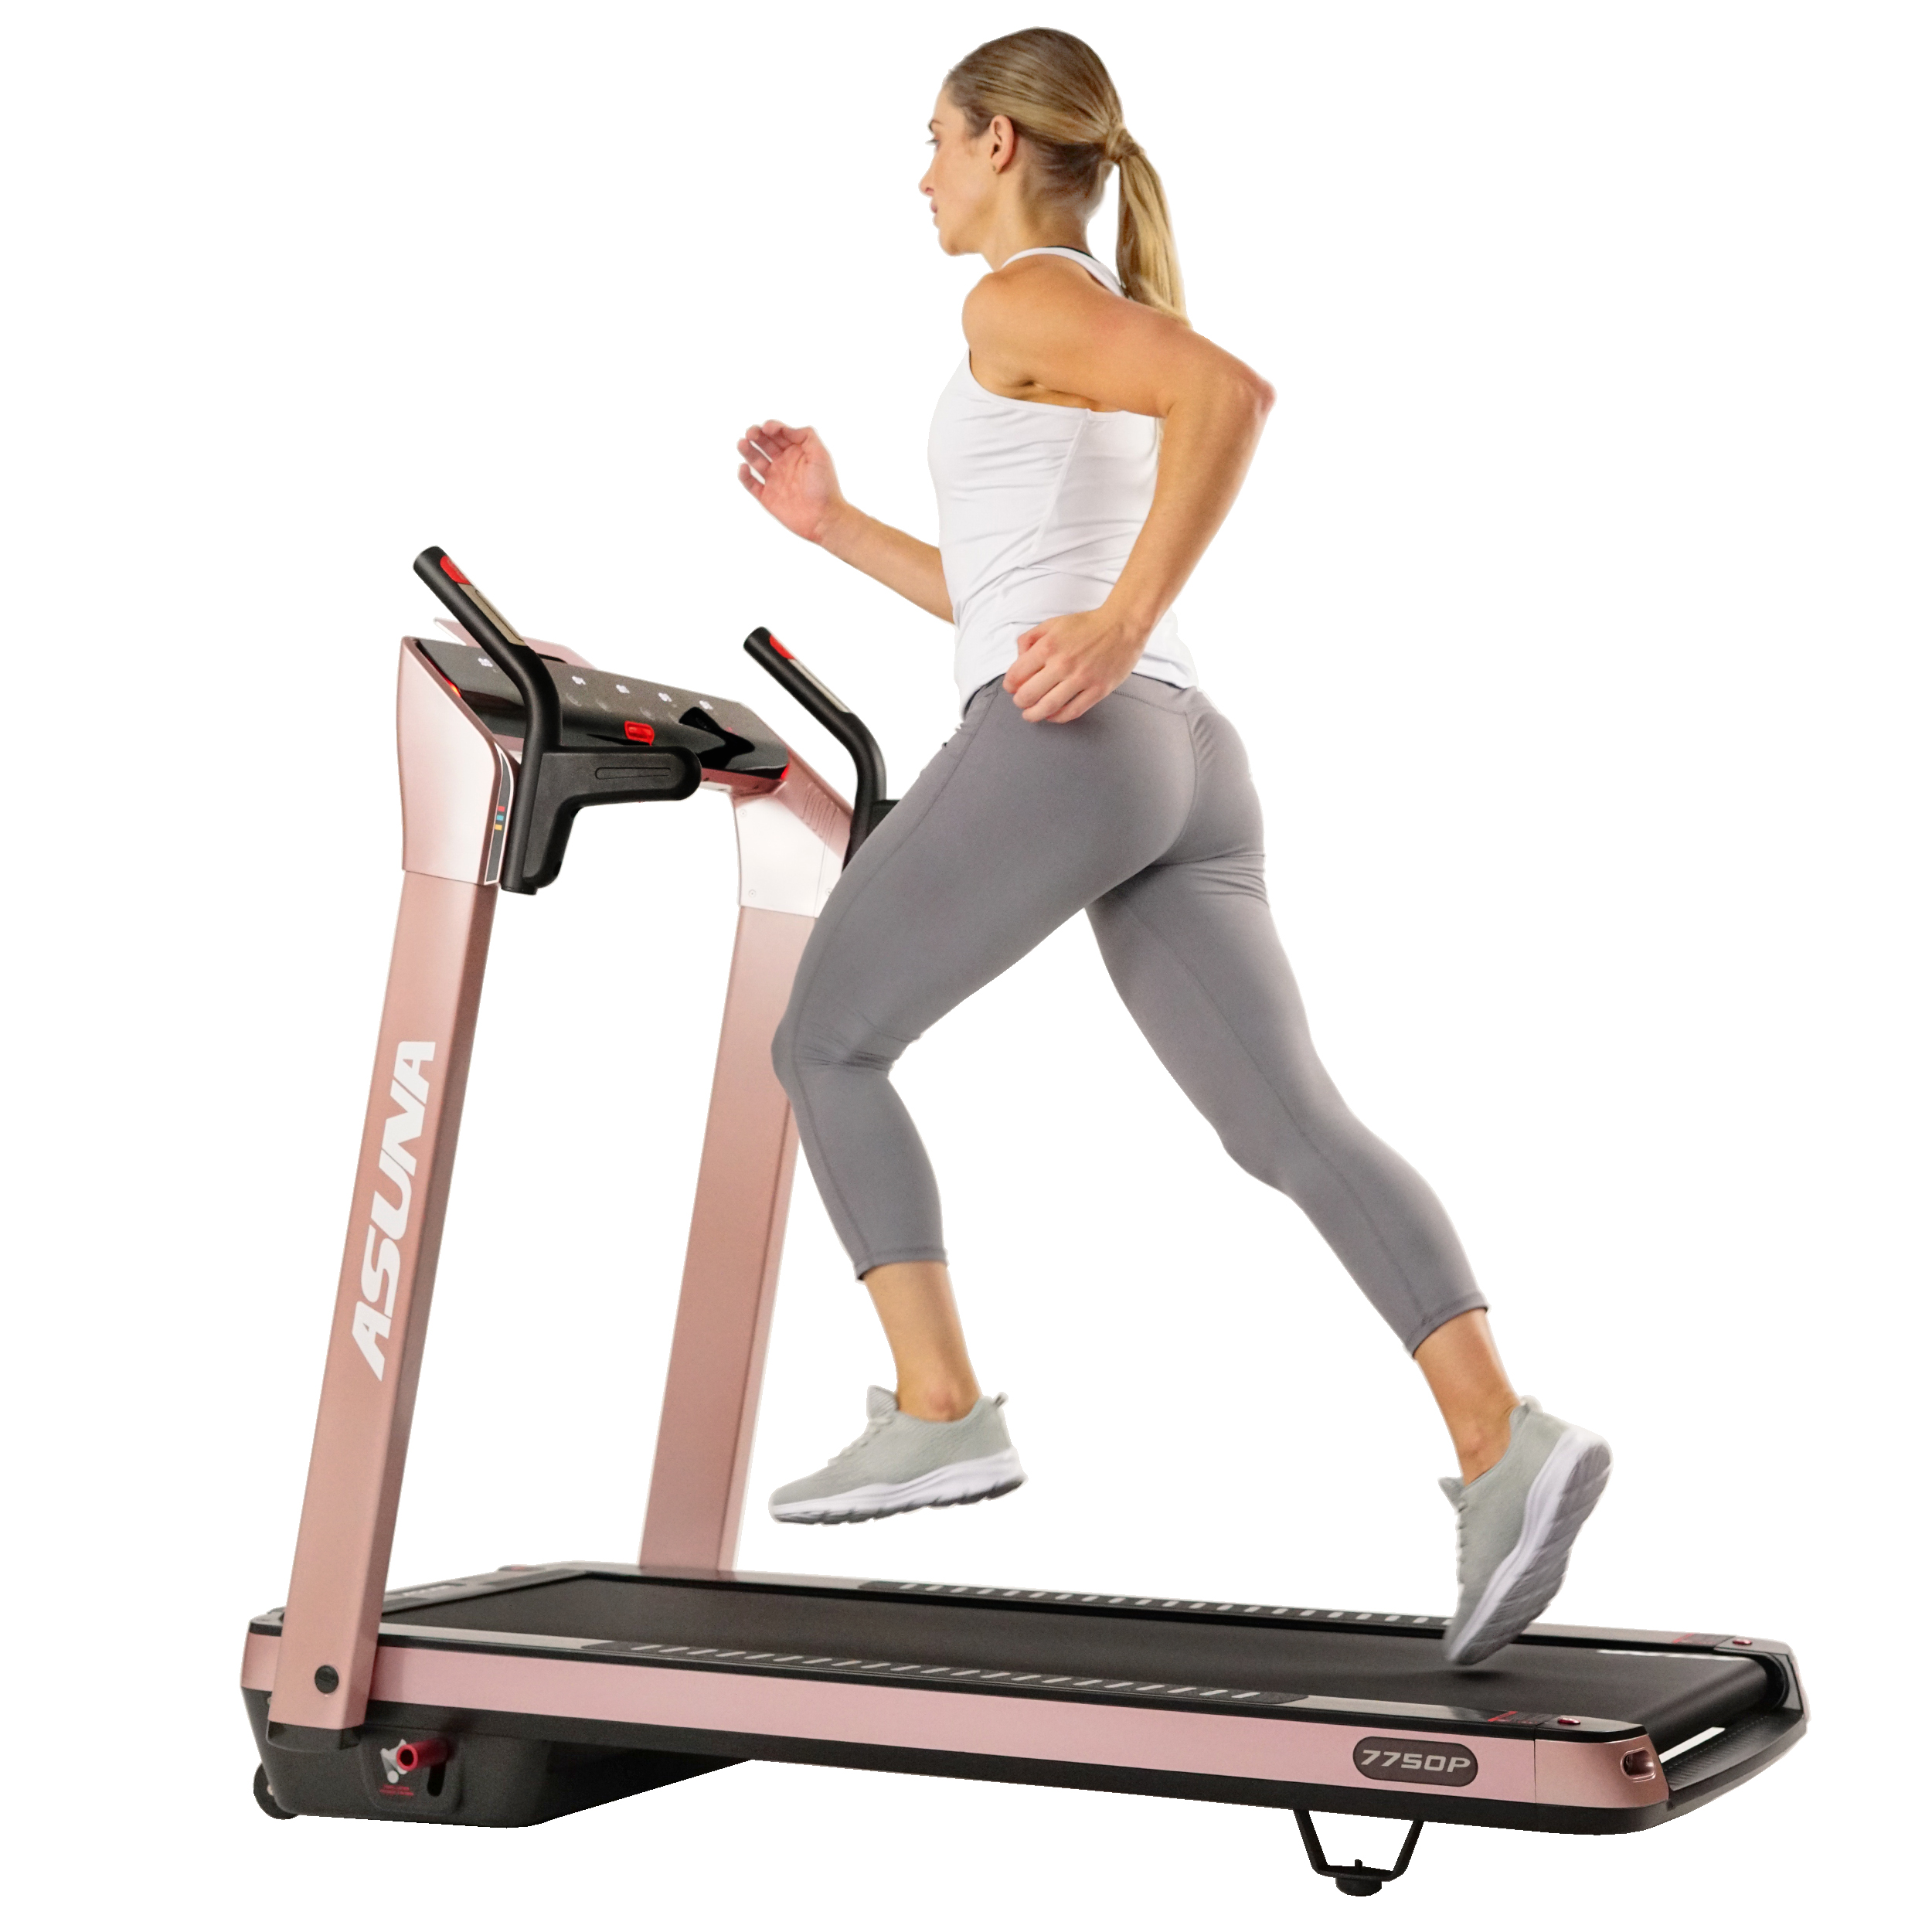 ASUNA SpaceFlex Motorized Treadmill with Auto Incline, Wide Folding Belt - 7750Pink - image 7 of 9